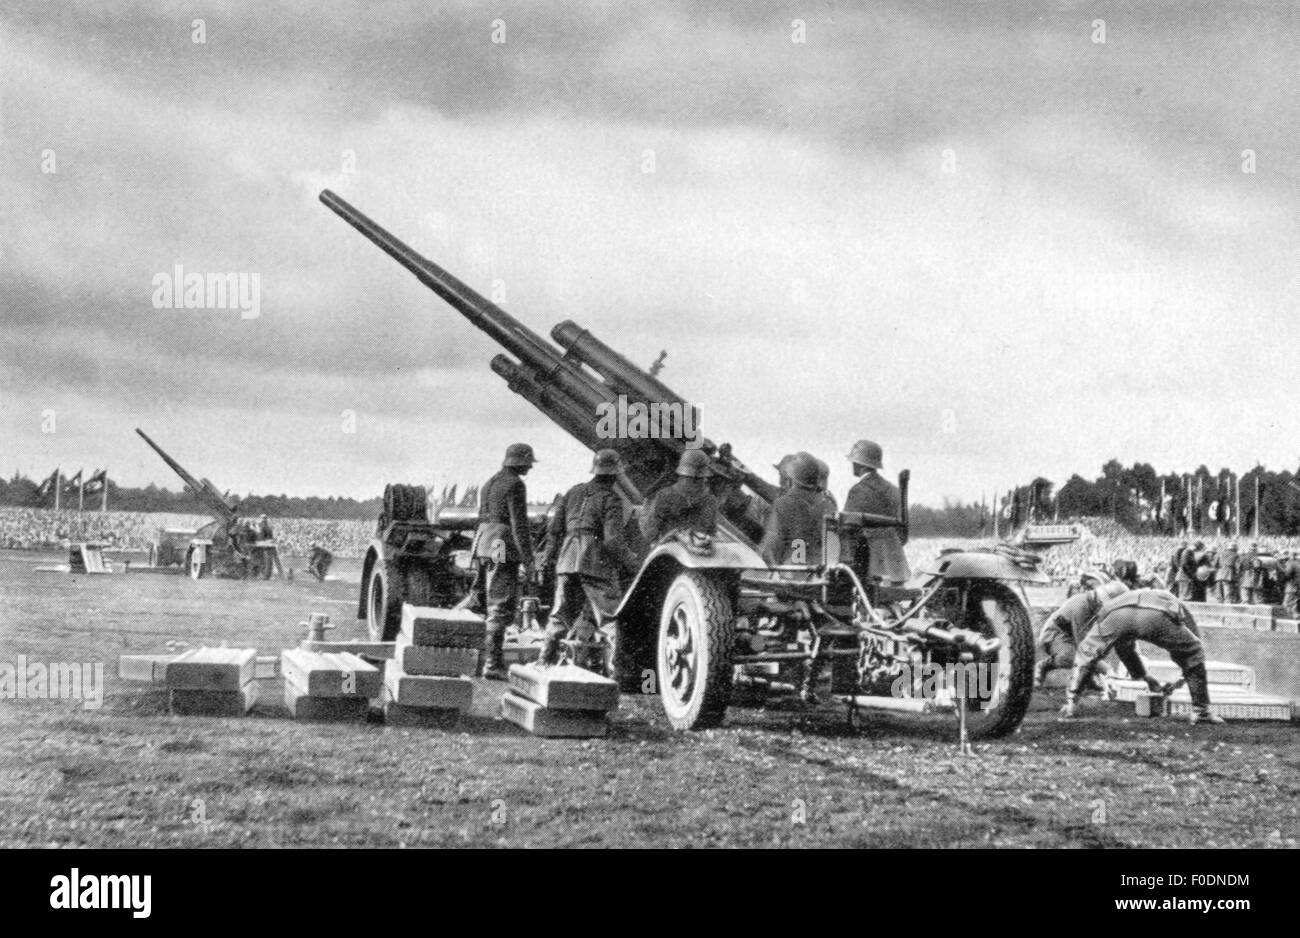 Nazism / National Socialism, Nuremberg Rallies, 'Reichsparteitag der Freiheit', Nuremberg, 5. - 10.9.1935, day of the Wehrmacht, show of anti-aircraft defence, 8,8-cm anti-aircraft guns in position, Additional-Rights-Clearences-Not Available Stock Photo